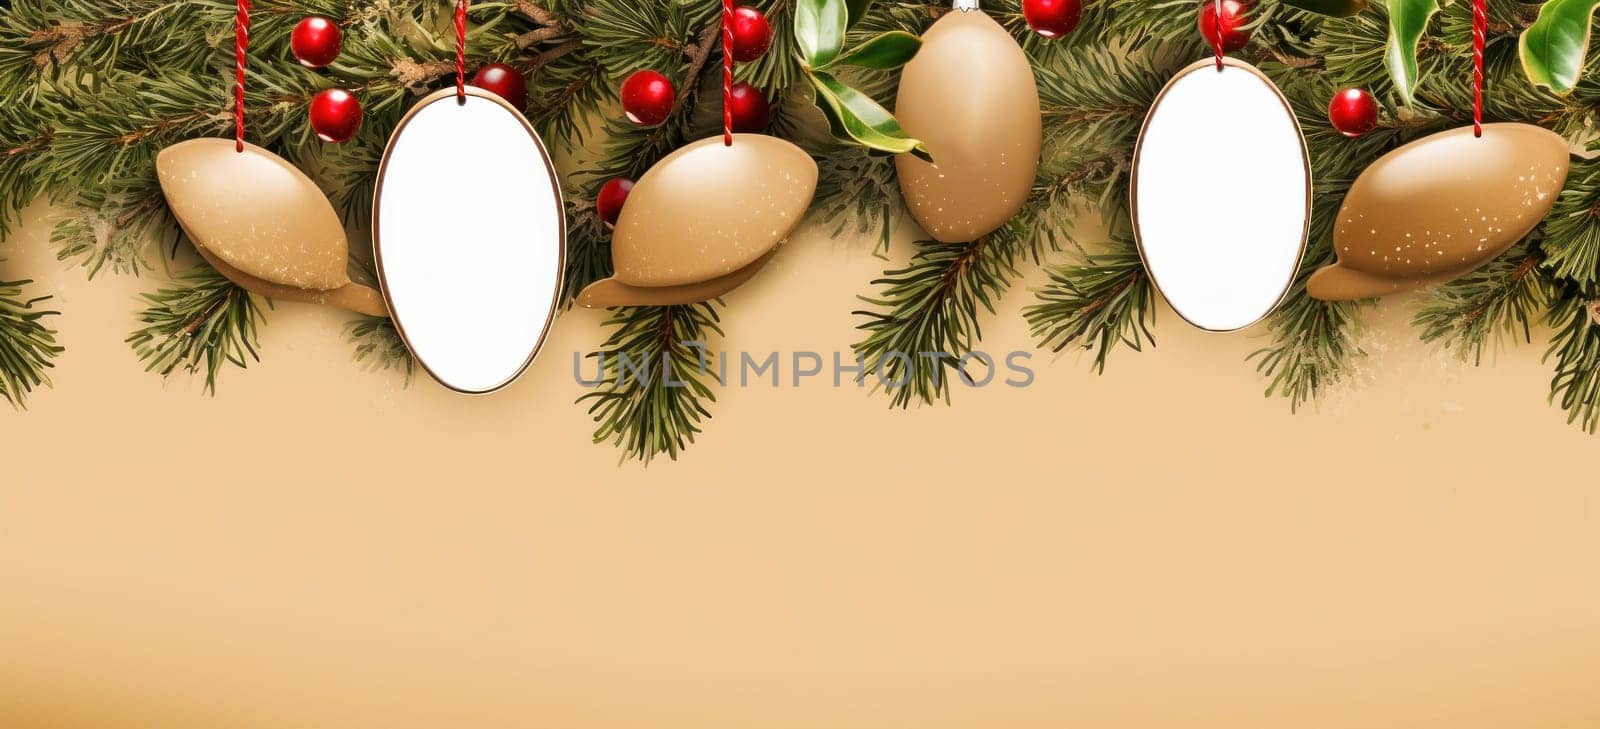 Embellished template with photo insertion to create a personalized New Year card. Christmas decorations and a cozy atmosphere.